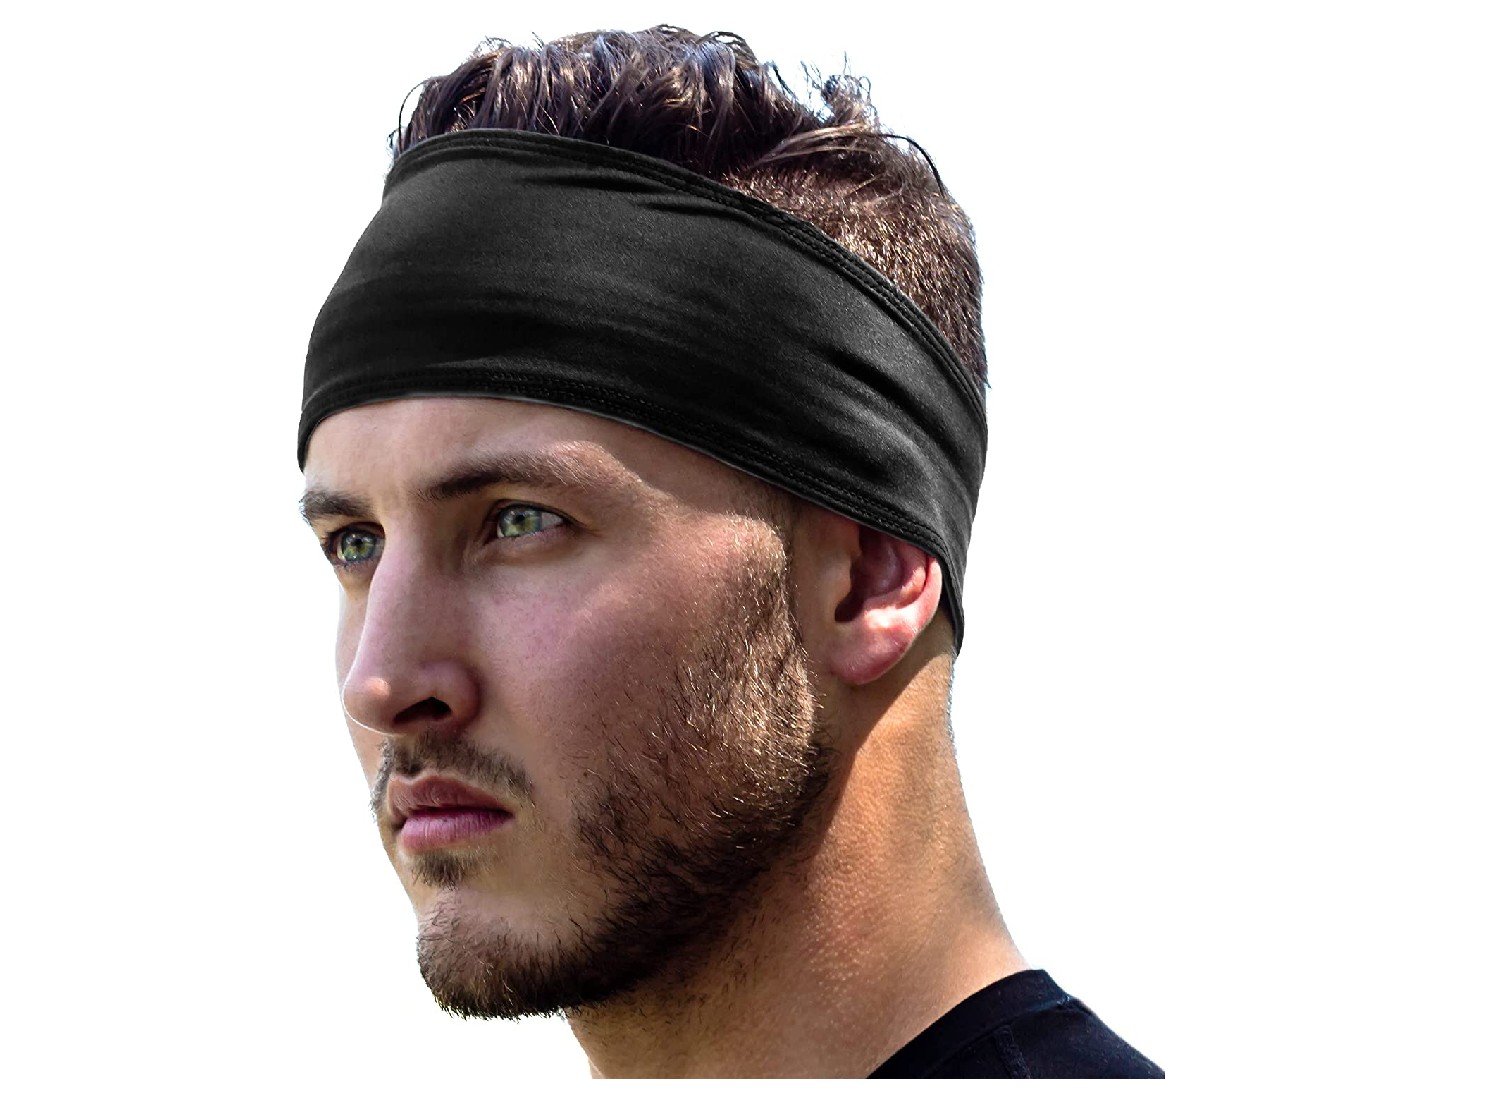 Headband Hairstyles for Men, and Some Dope Headbands